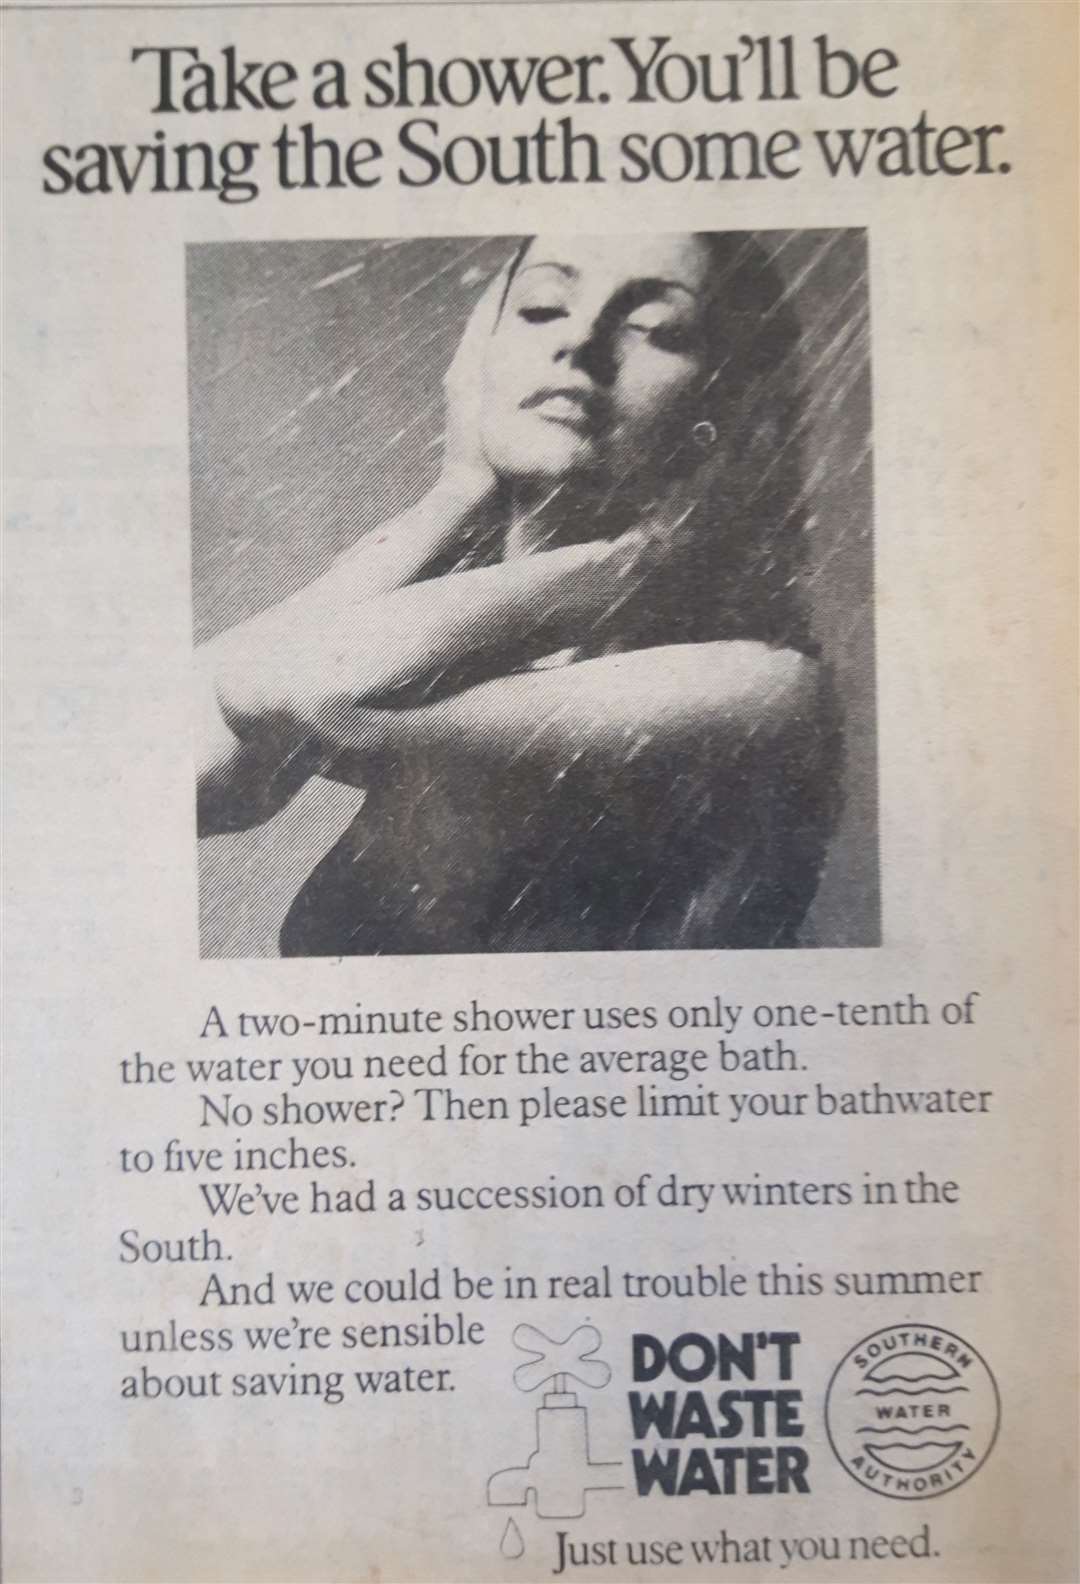 Newspaper adverts encouraged people to take a shower rather than a bath